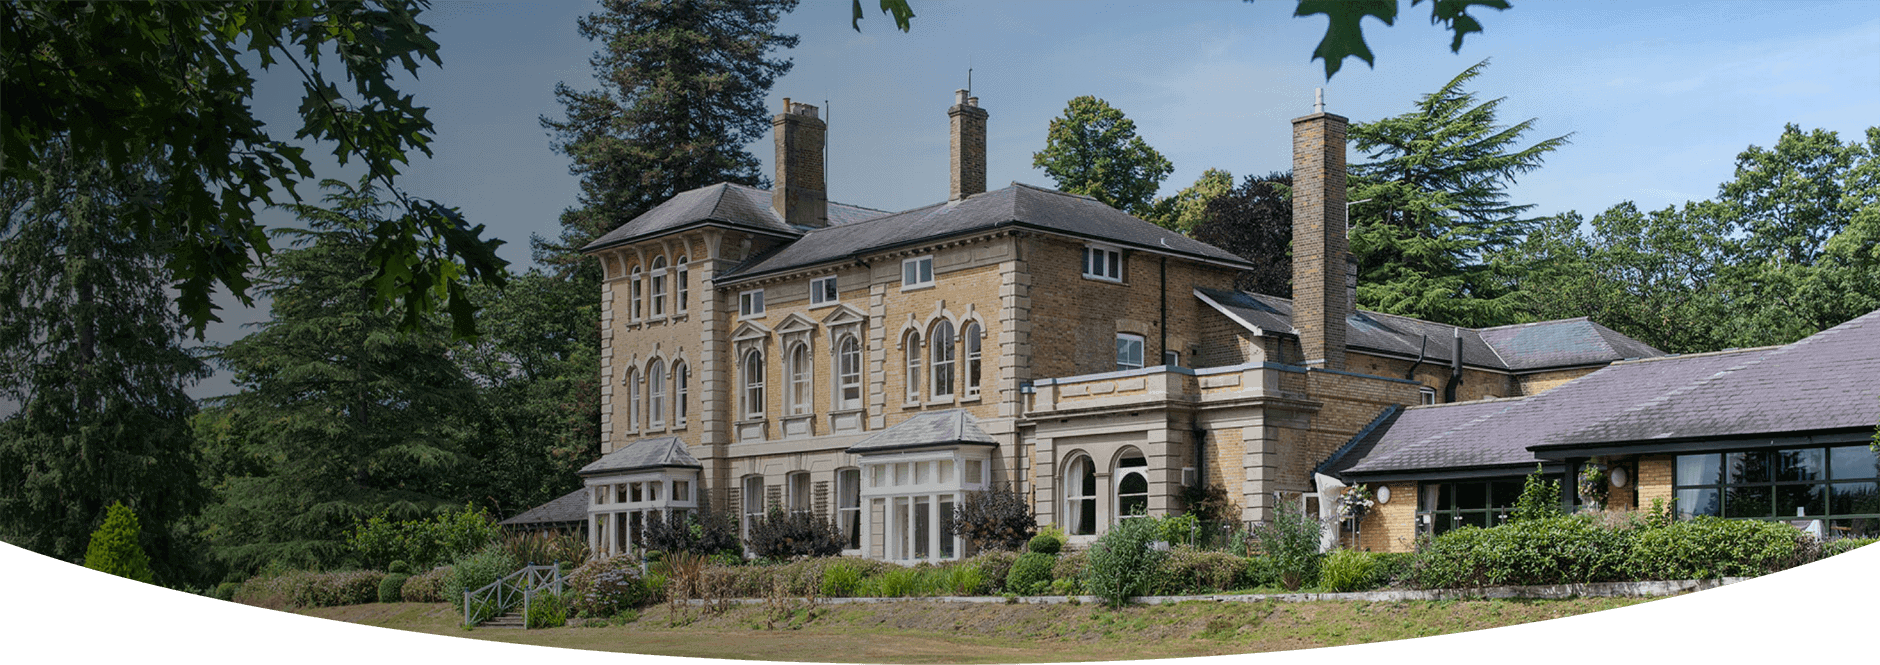 A luxury care home